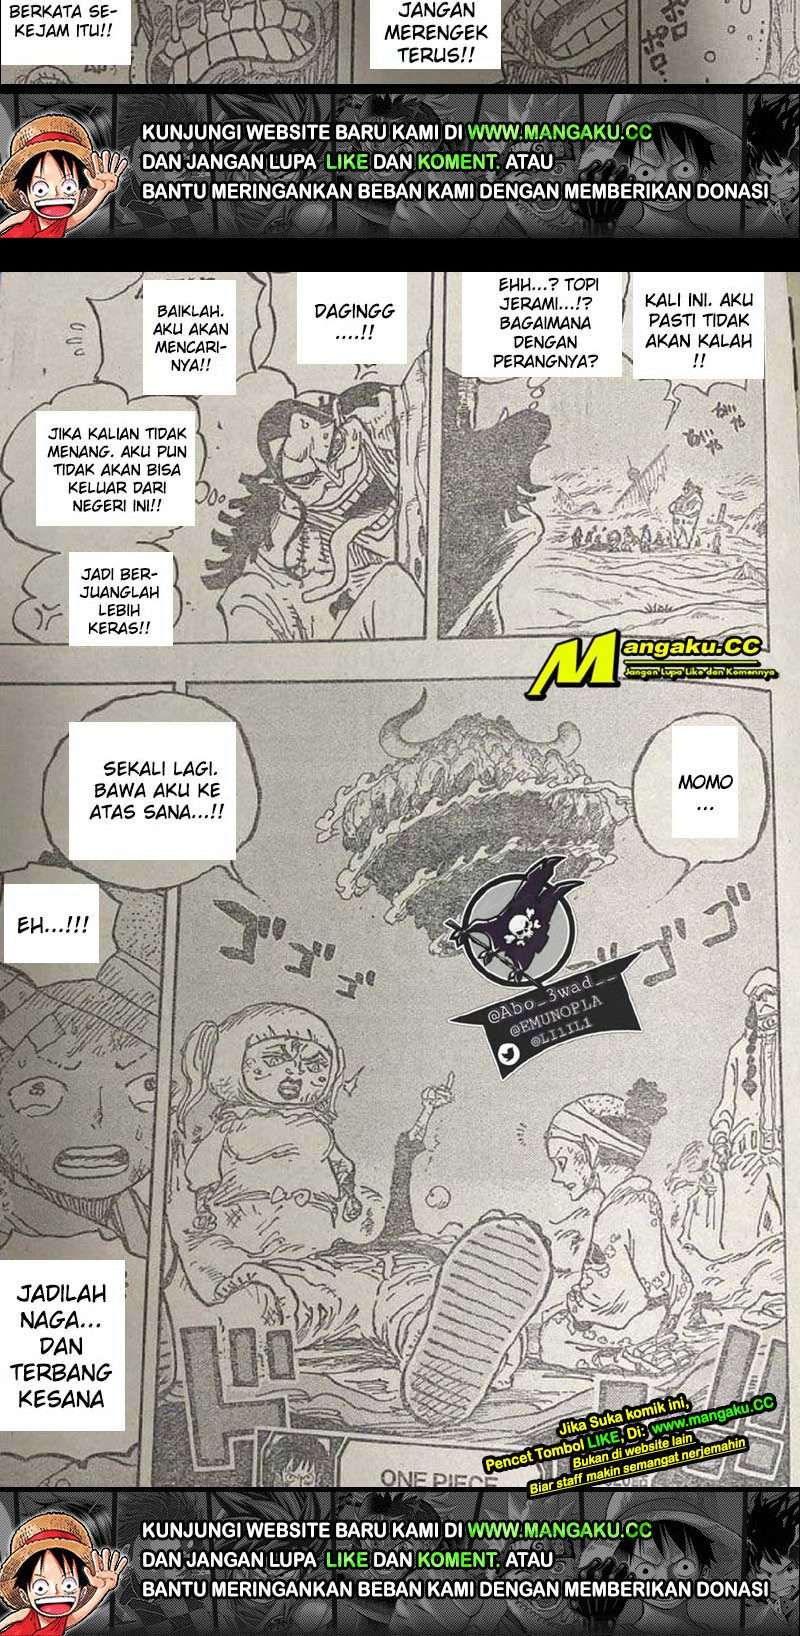 One Piece Chapter 1020 Lq - 47